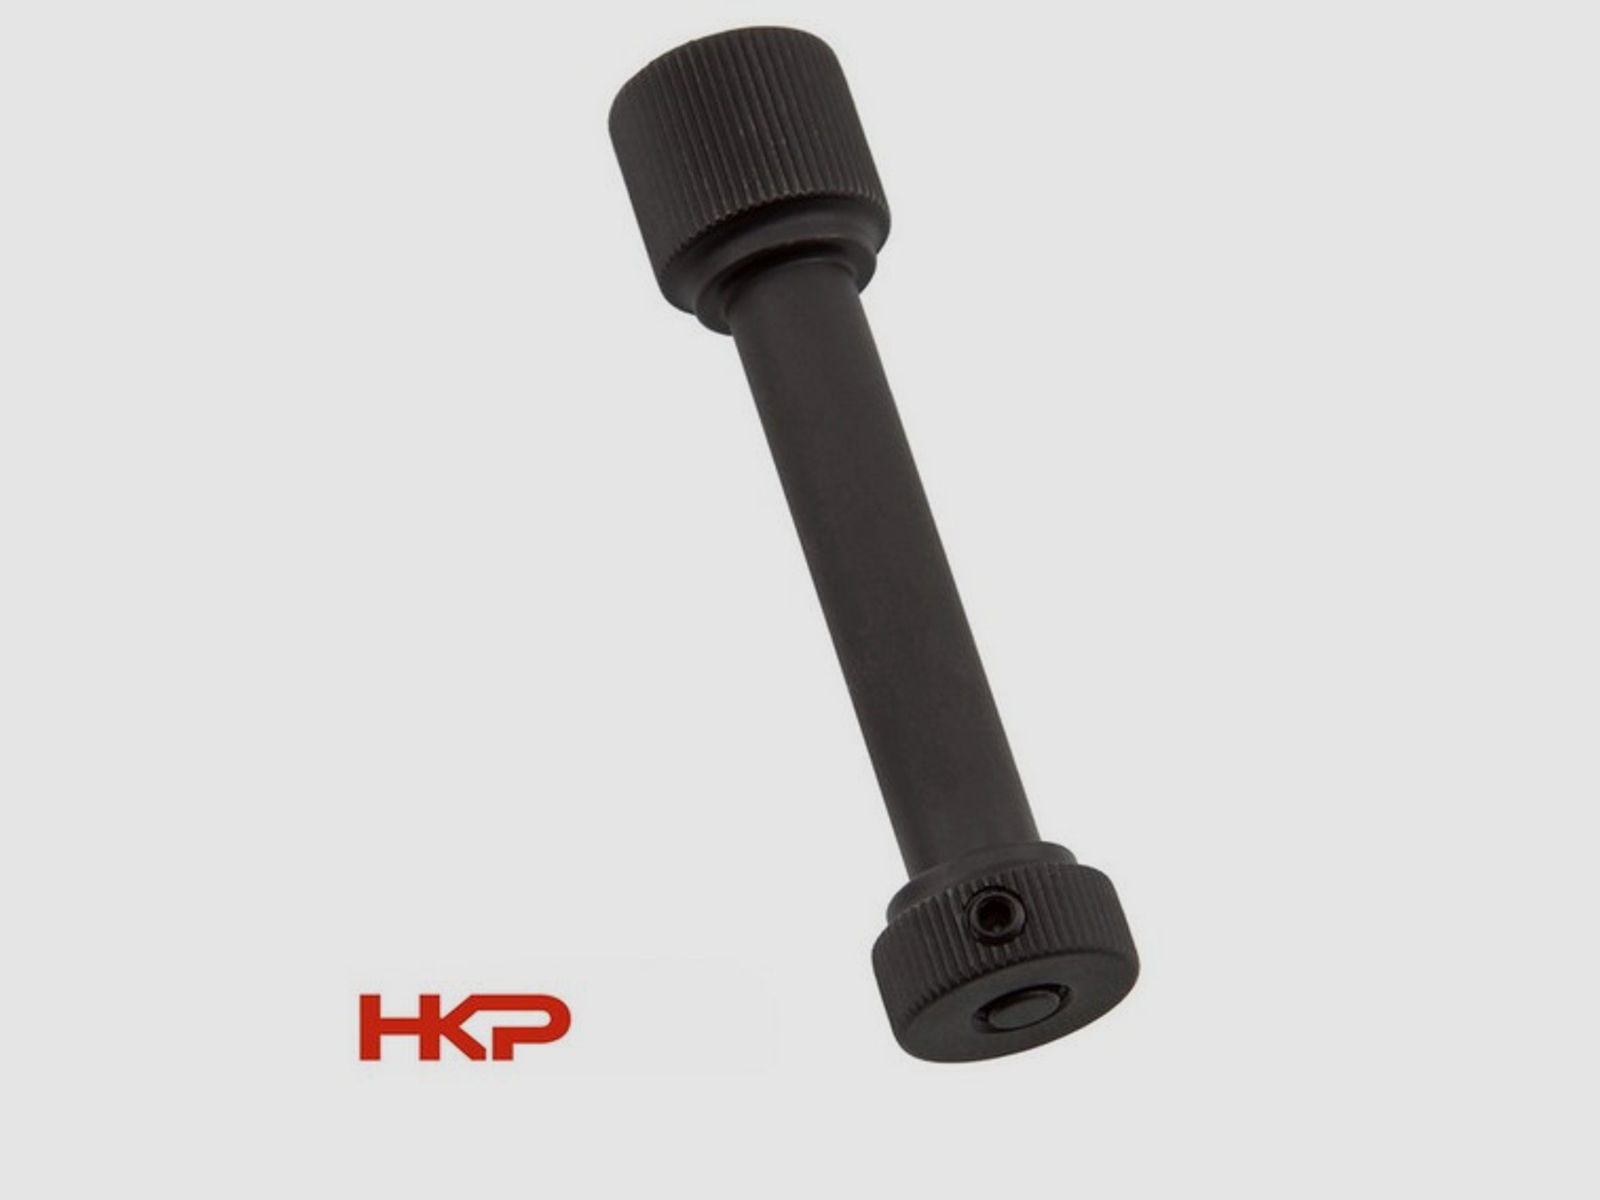 HKP Quick Detach Sling Attachment Sling Pin - Large